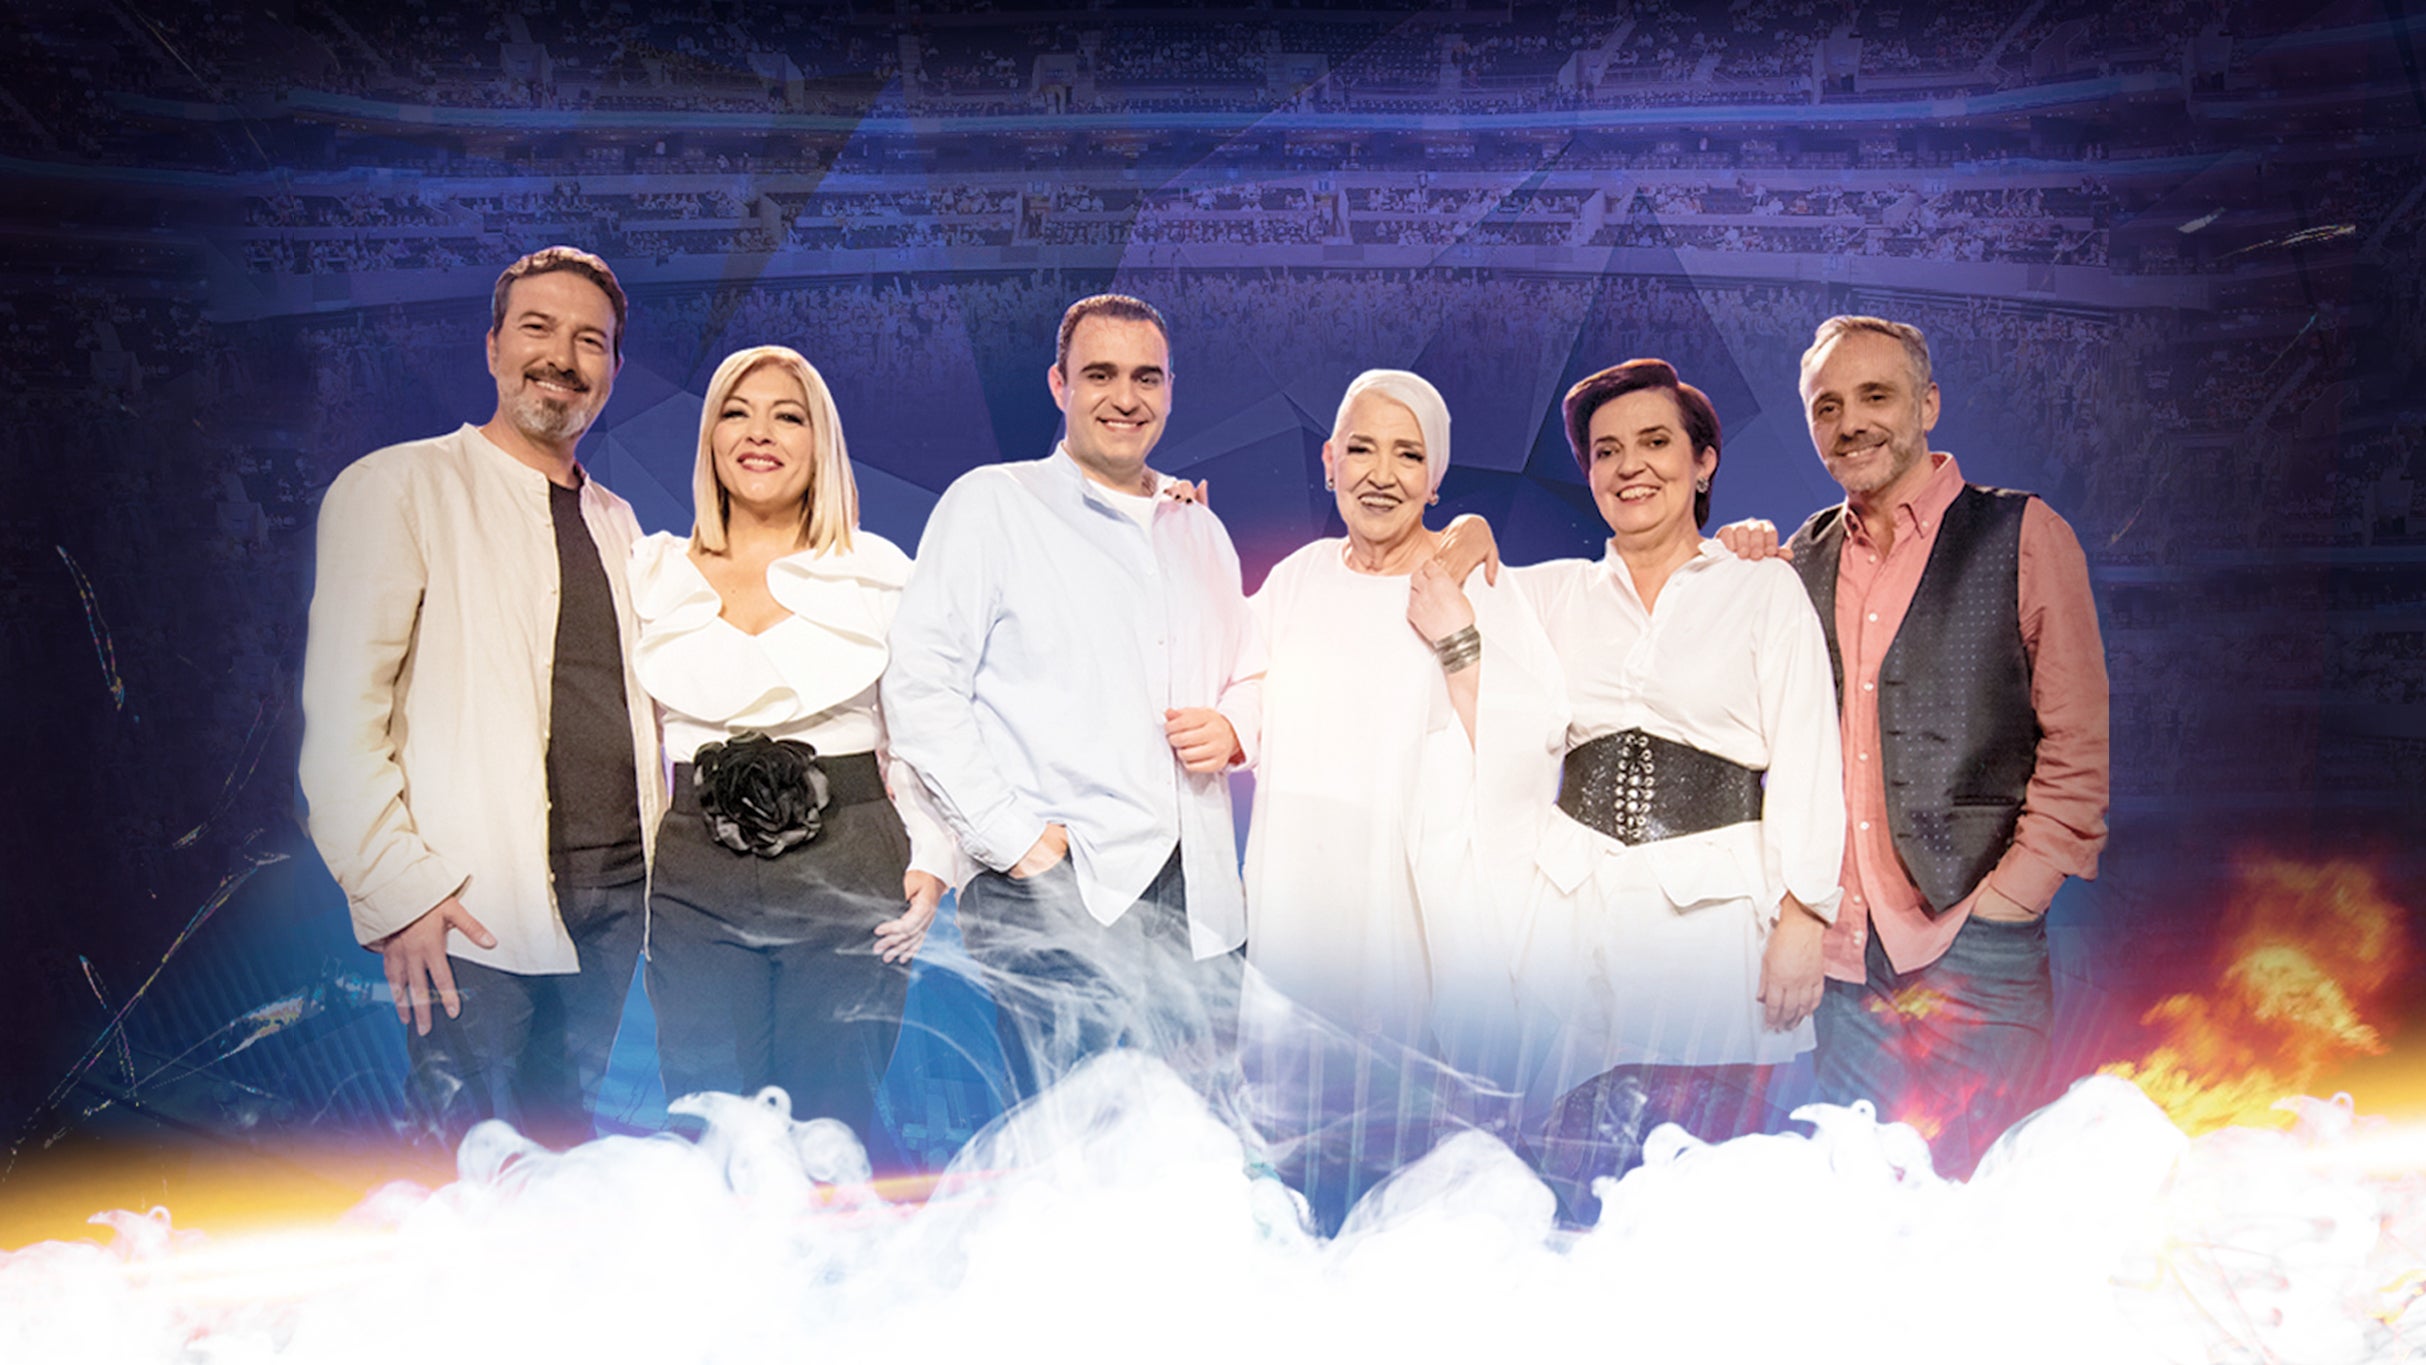 working presale password to Mocedades affordable tickets in Orlando